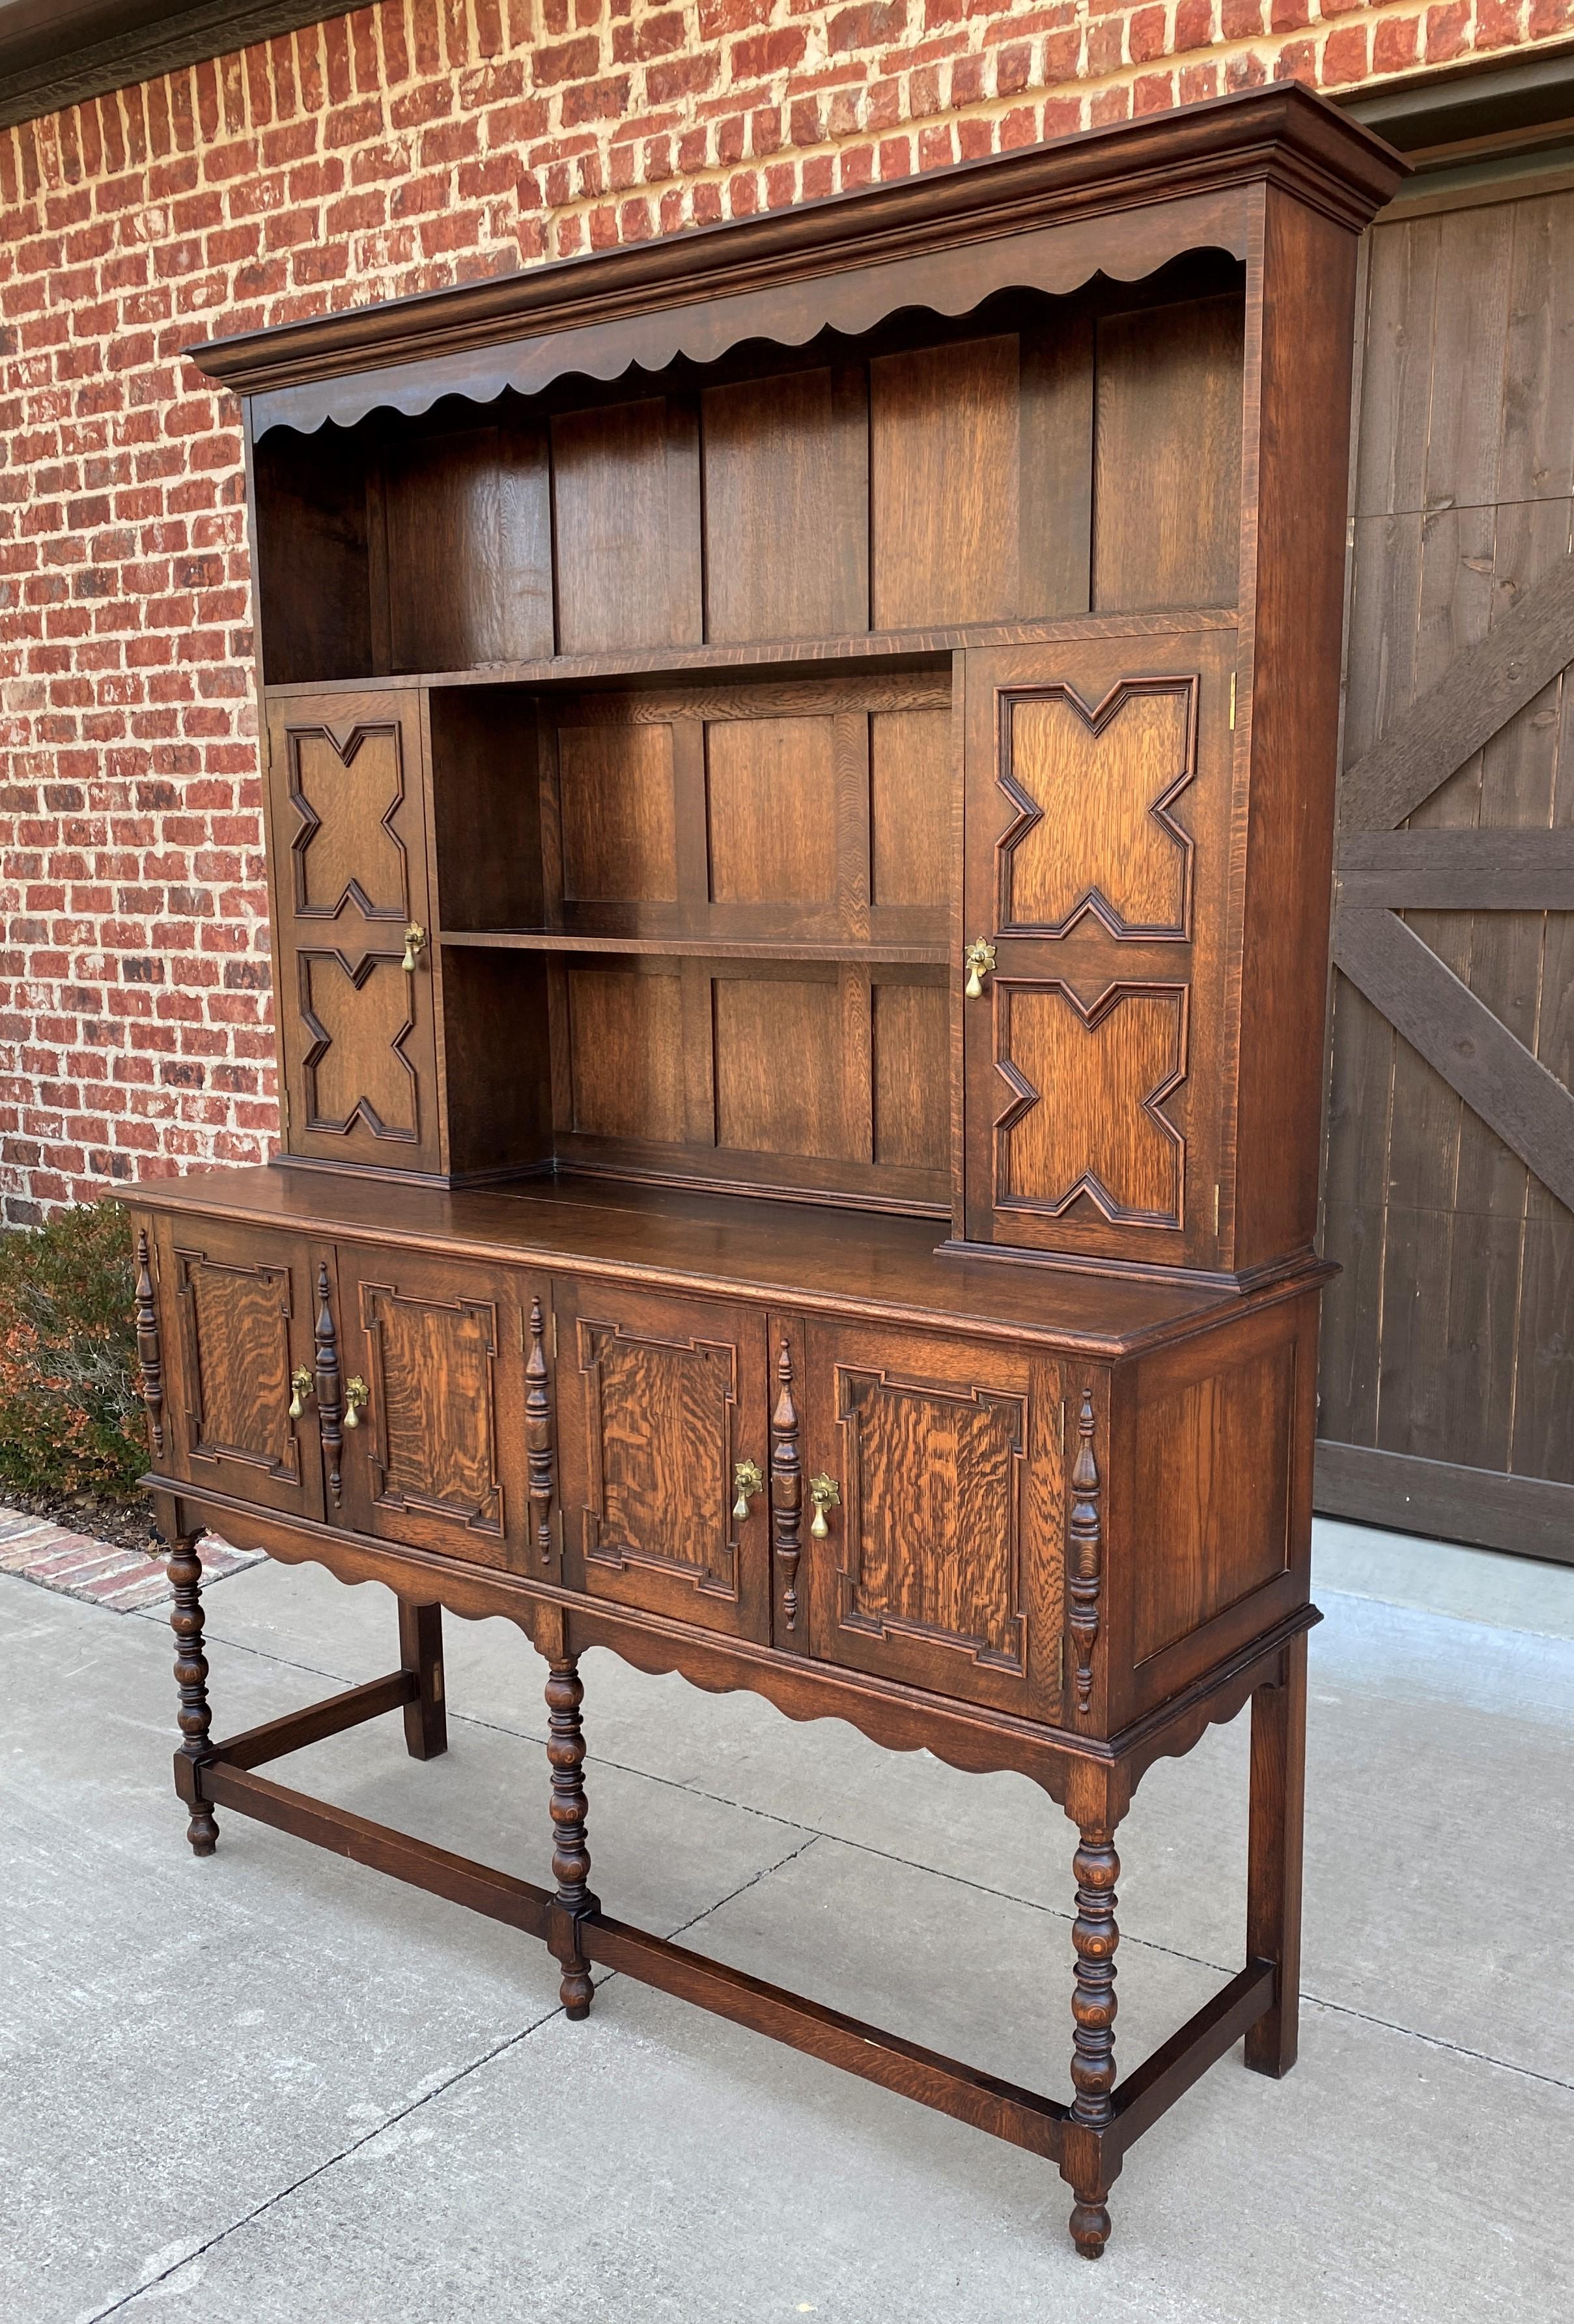 Gorgeous antique English oak Jacobean Bobbin leg welsh plate dresser, sideboard or buffet with upper and lower cabinets~~c. 1890s


Full of character and classic English style plate dresser or hutch with bobbin legs~~fill it with your favorite